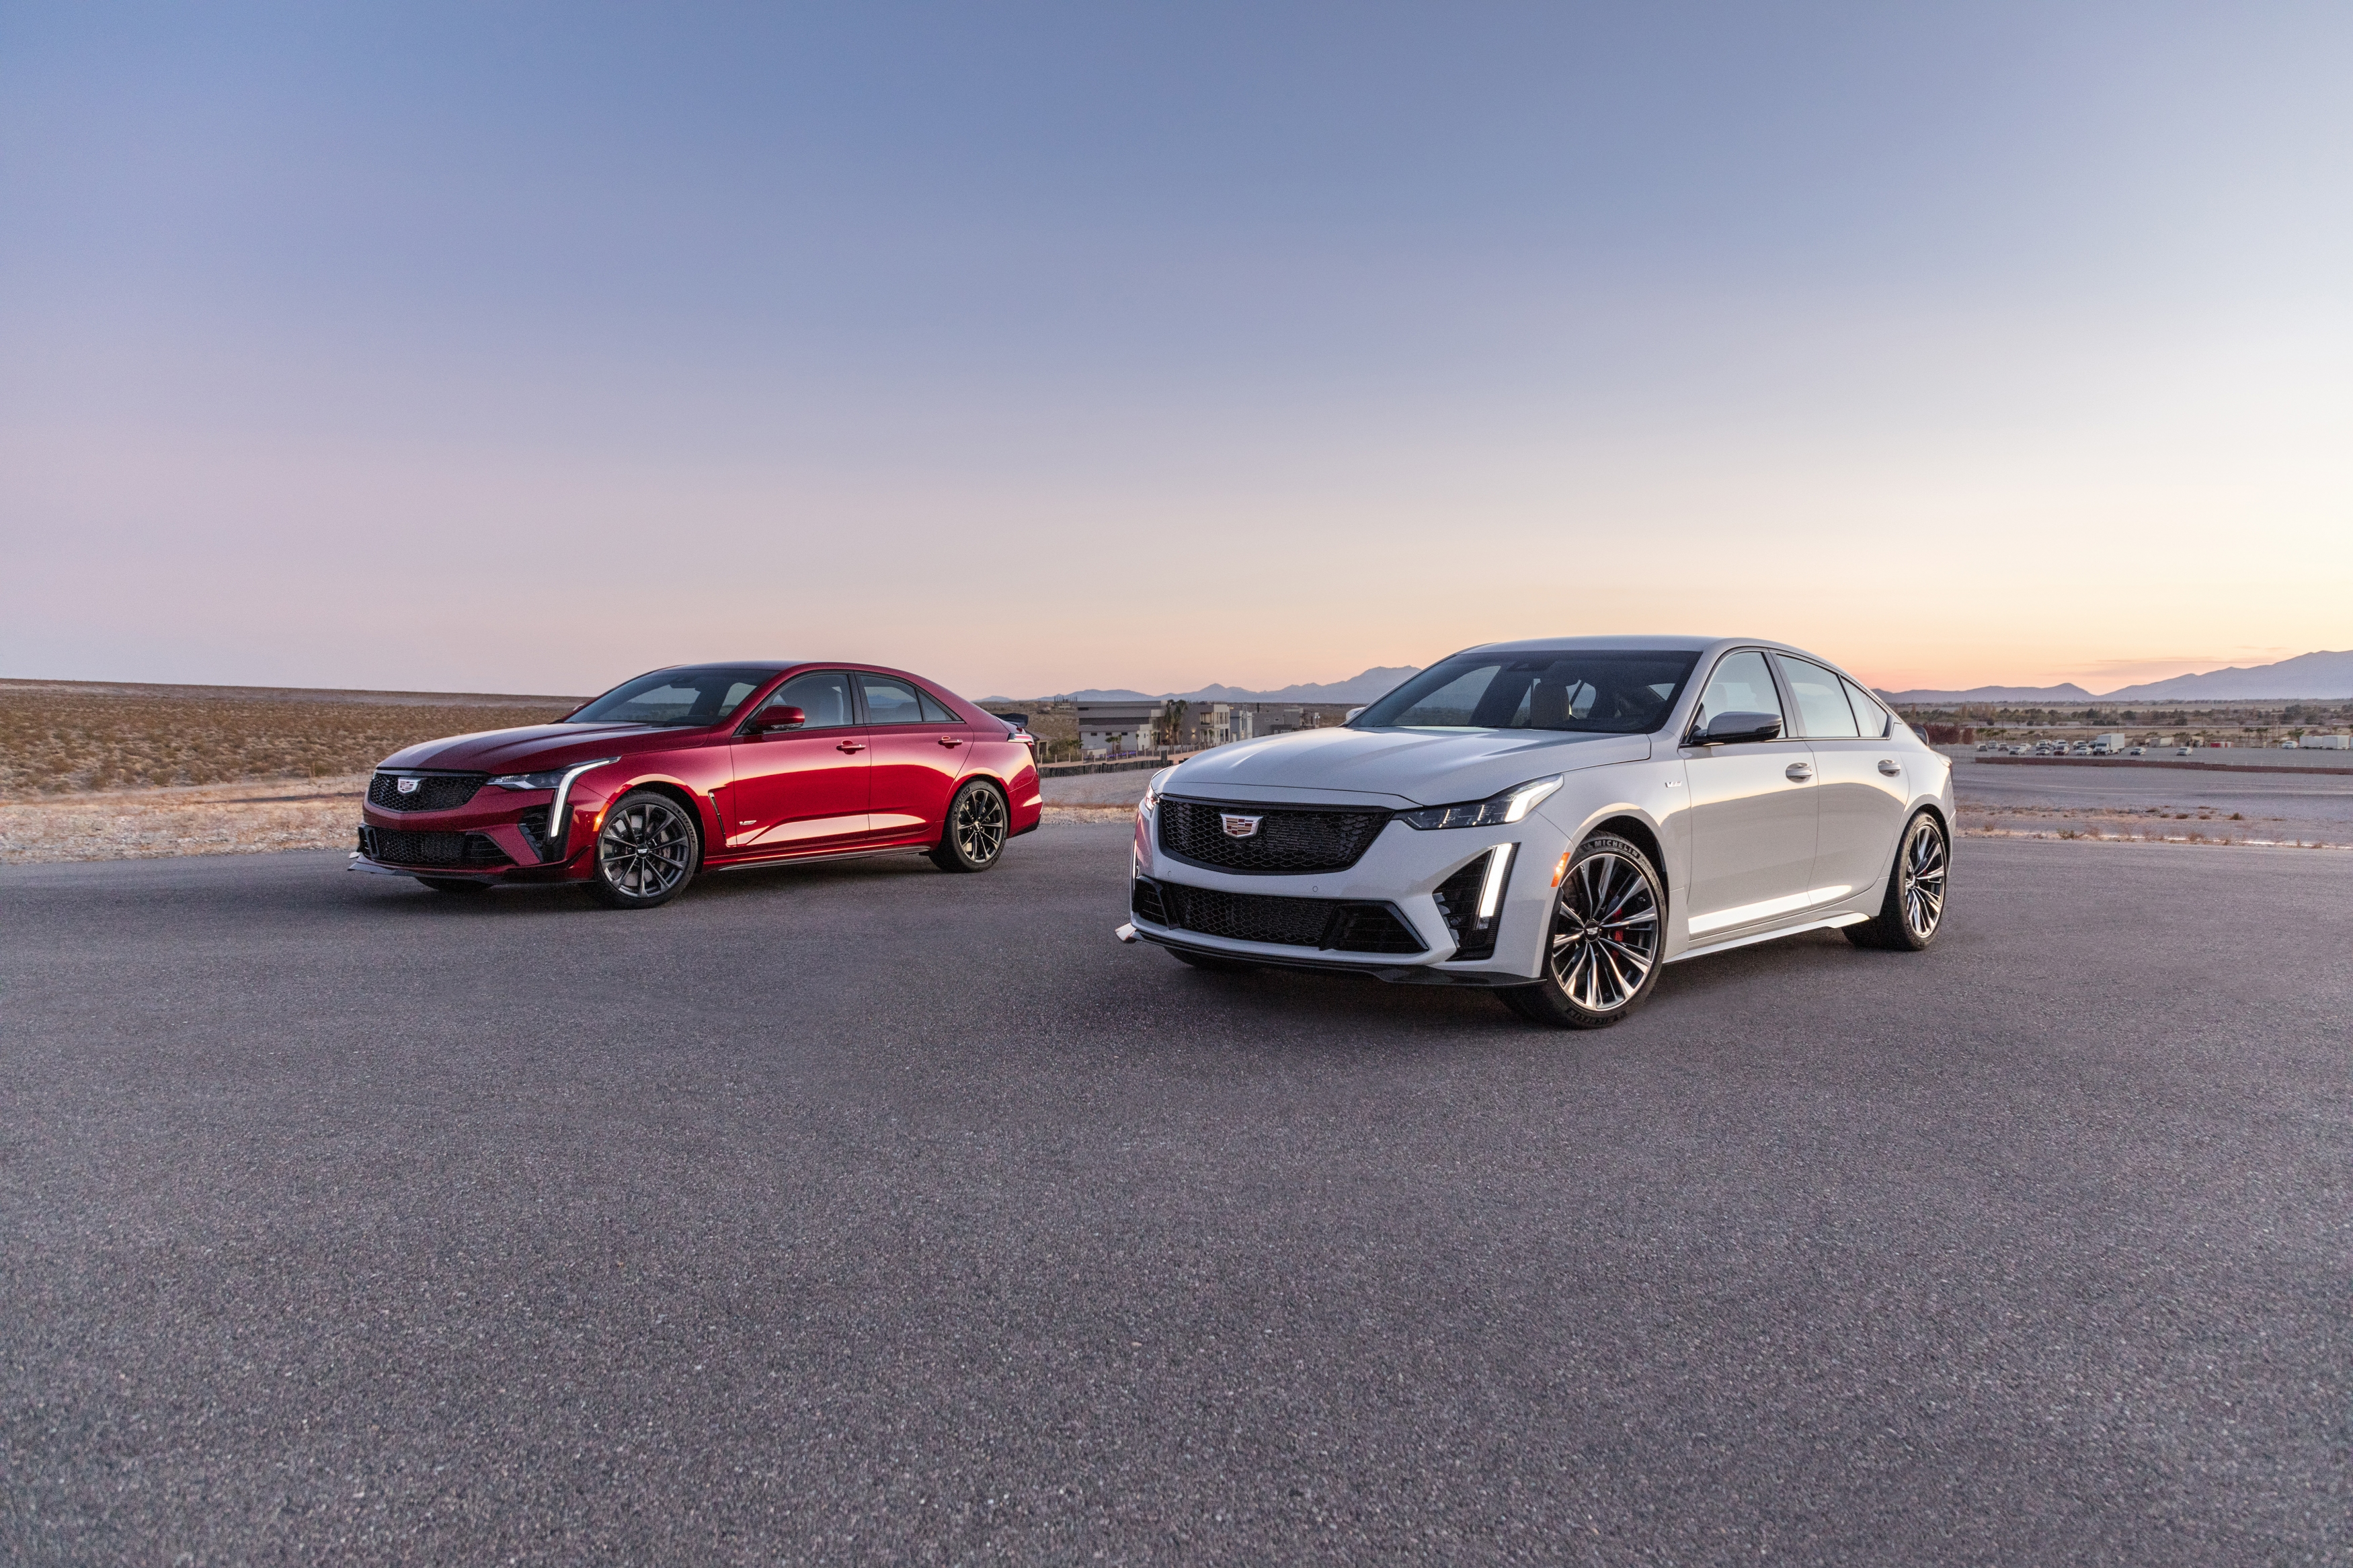 Cadillac Reveals 2022 CT4-V Blackwing and CT5-V Blackwing